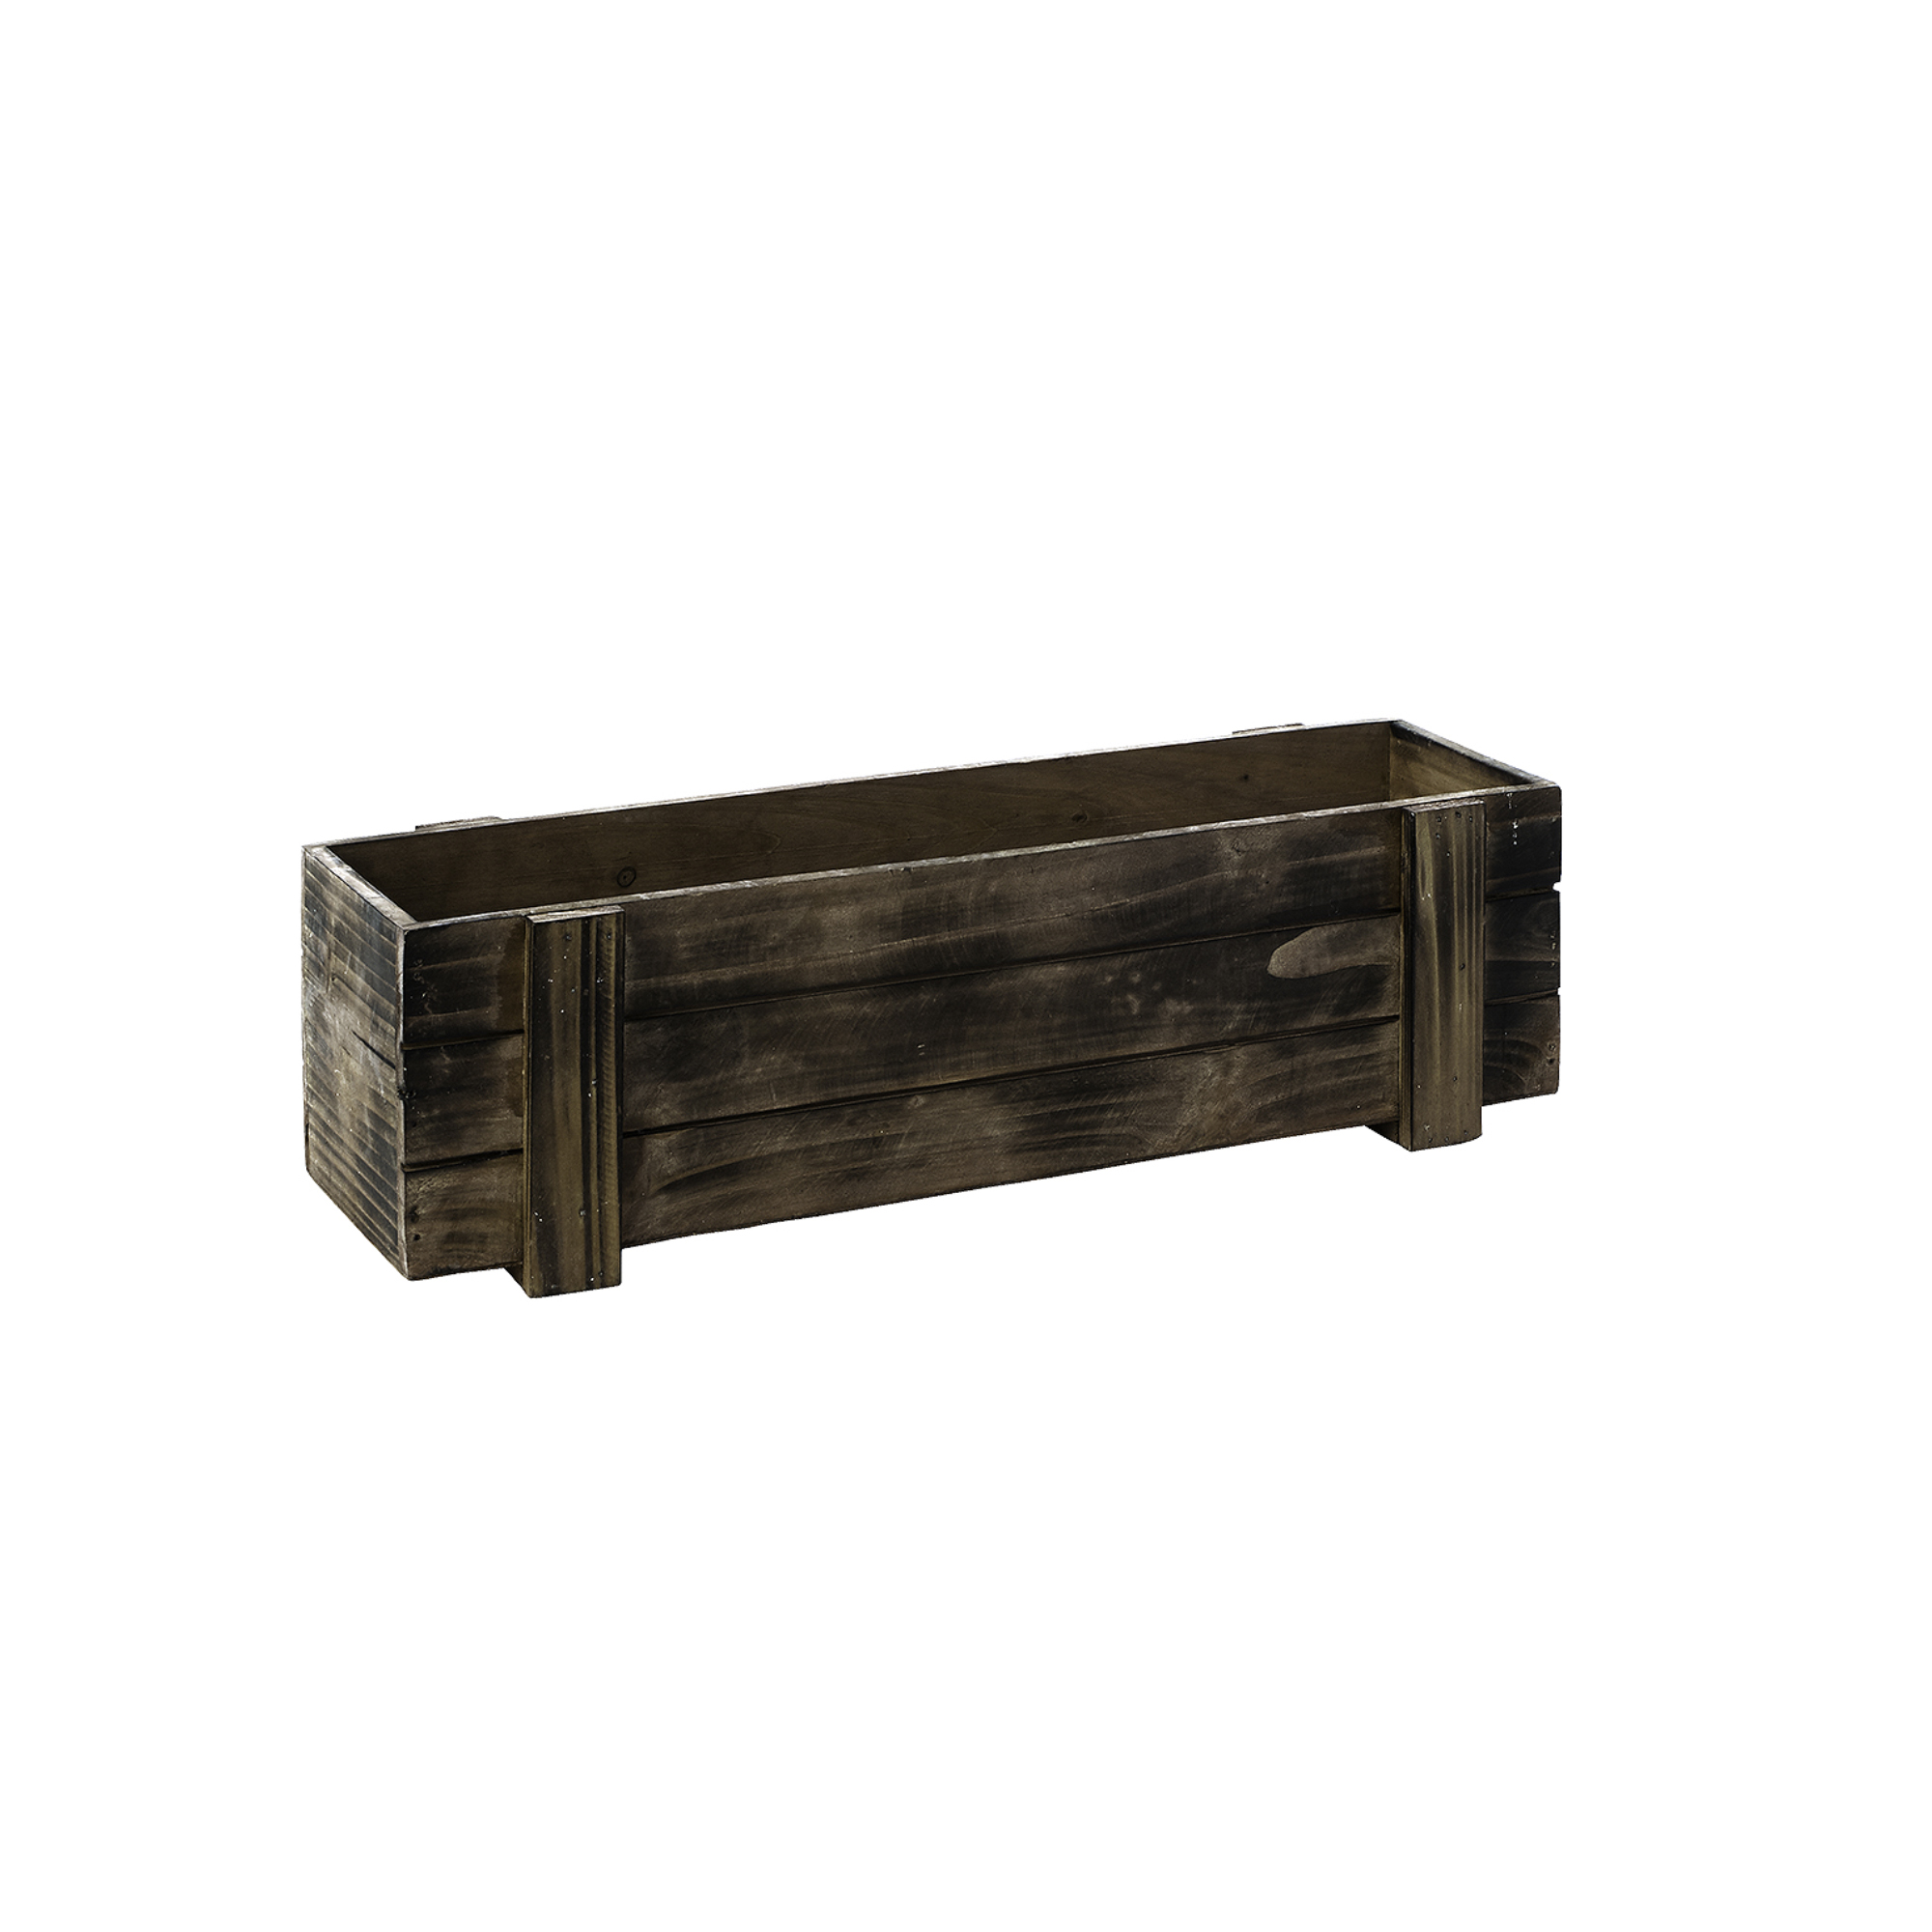 Smoked Brown Rustic Natural Wood Planter Box w/ Removable Plastic Liners